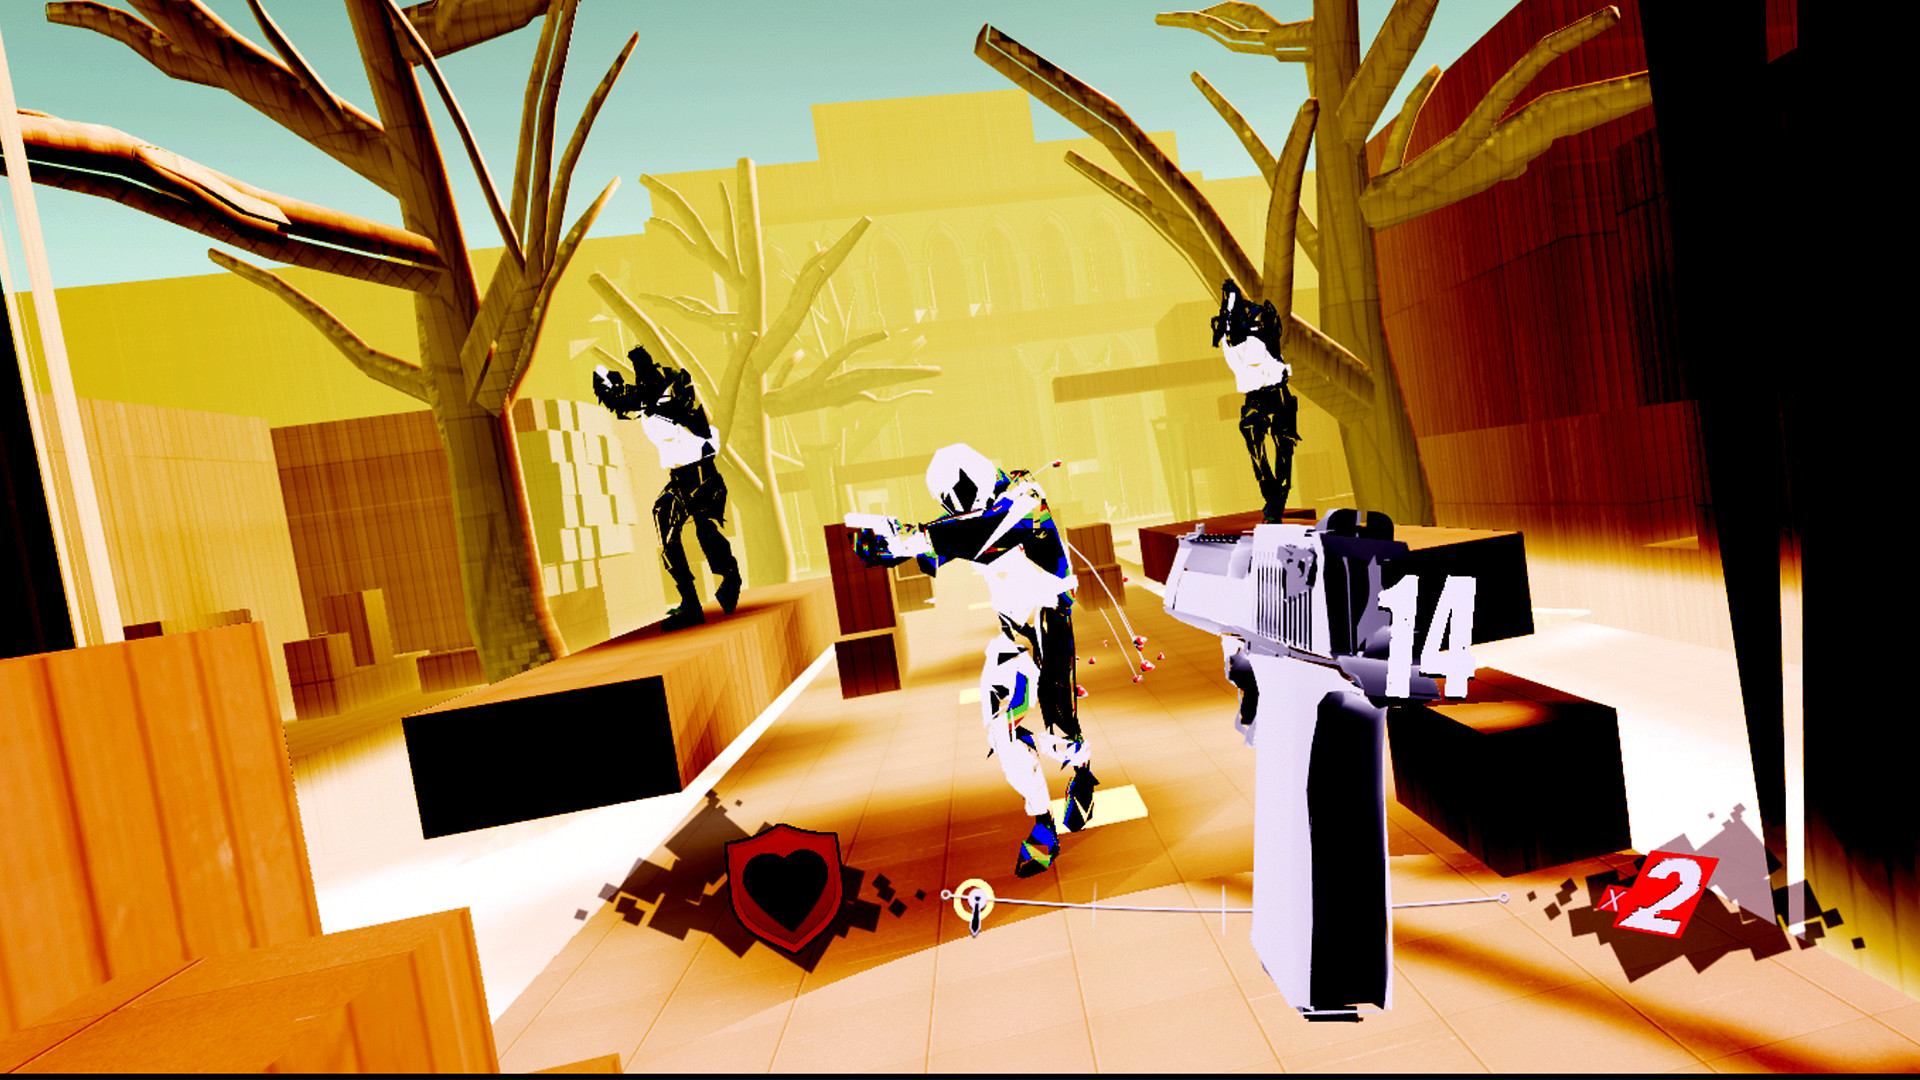 A group of enemies are unaware that the player's character is ready to shoot them in Pistol Whip